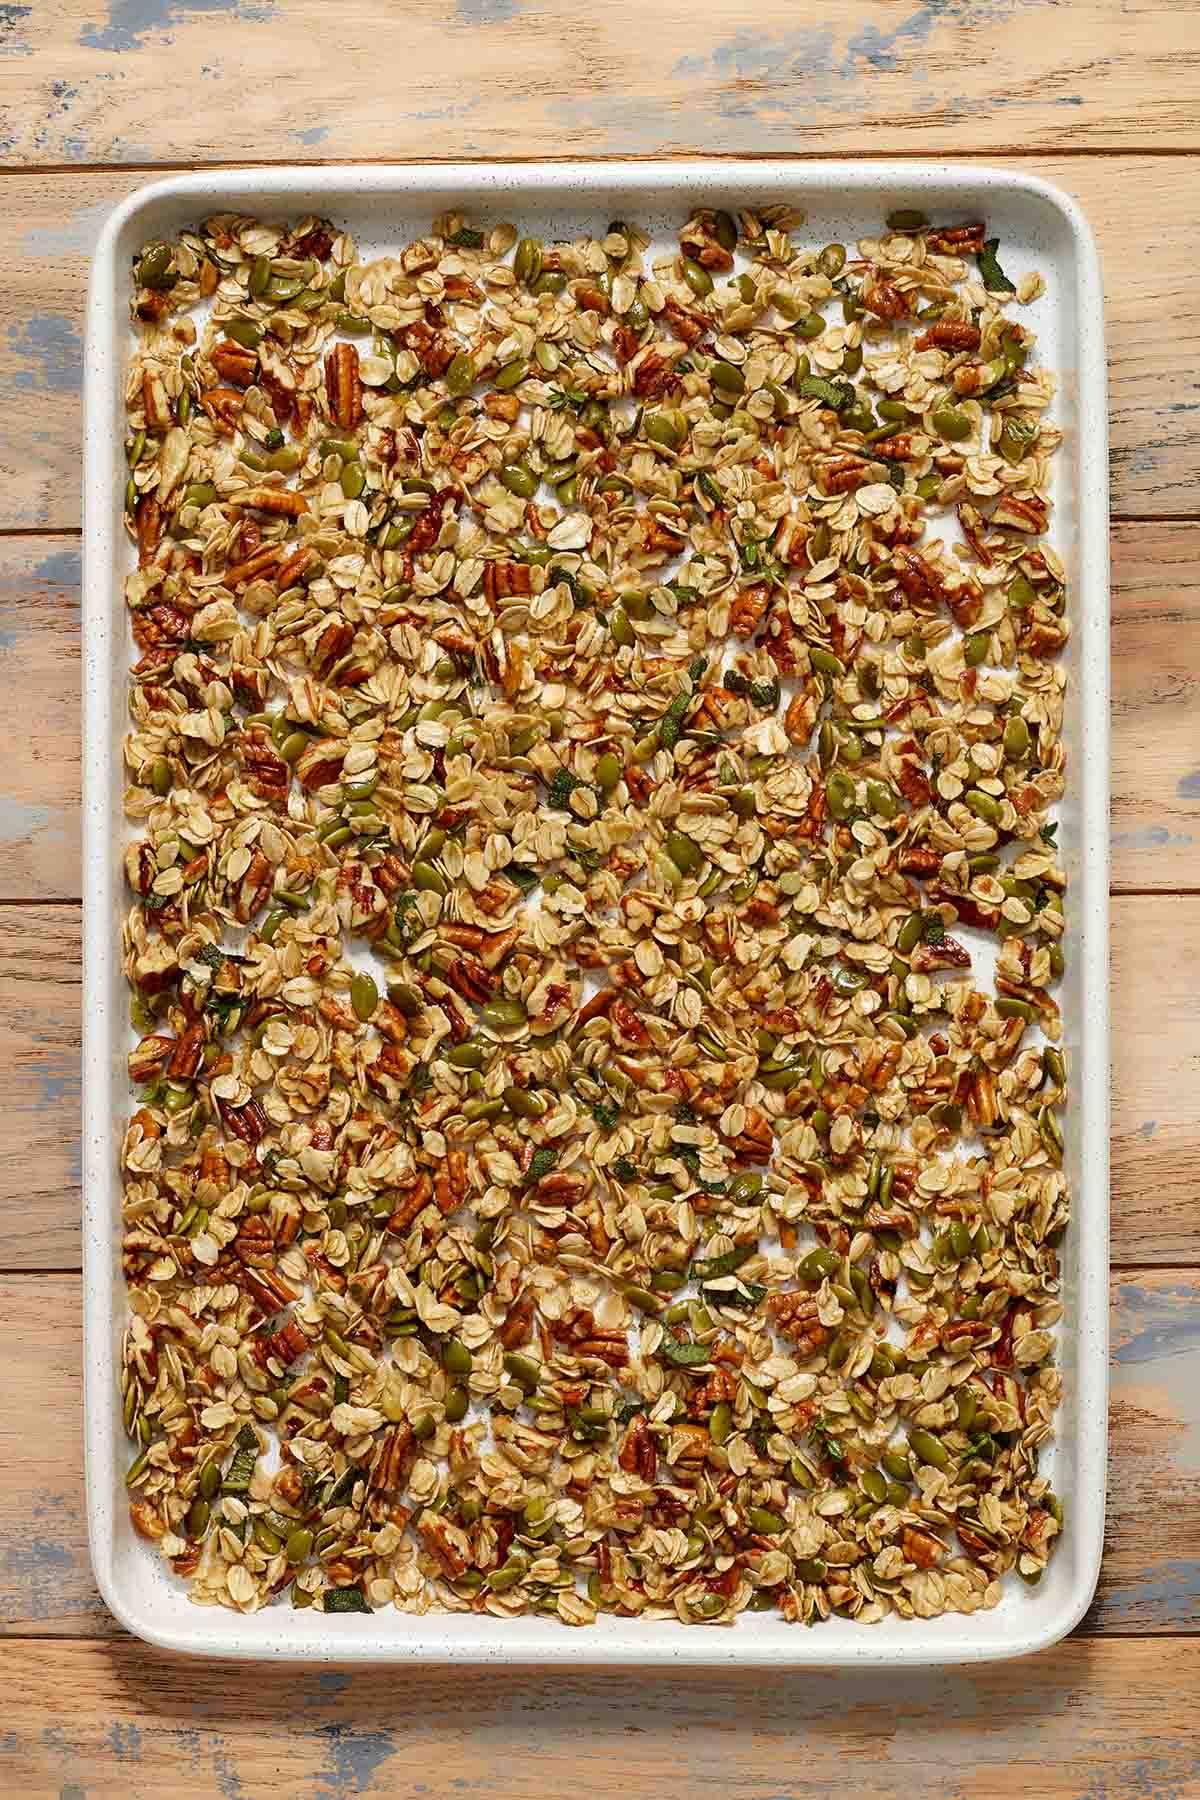 Granola mixture spread out on a large baking sheet.